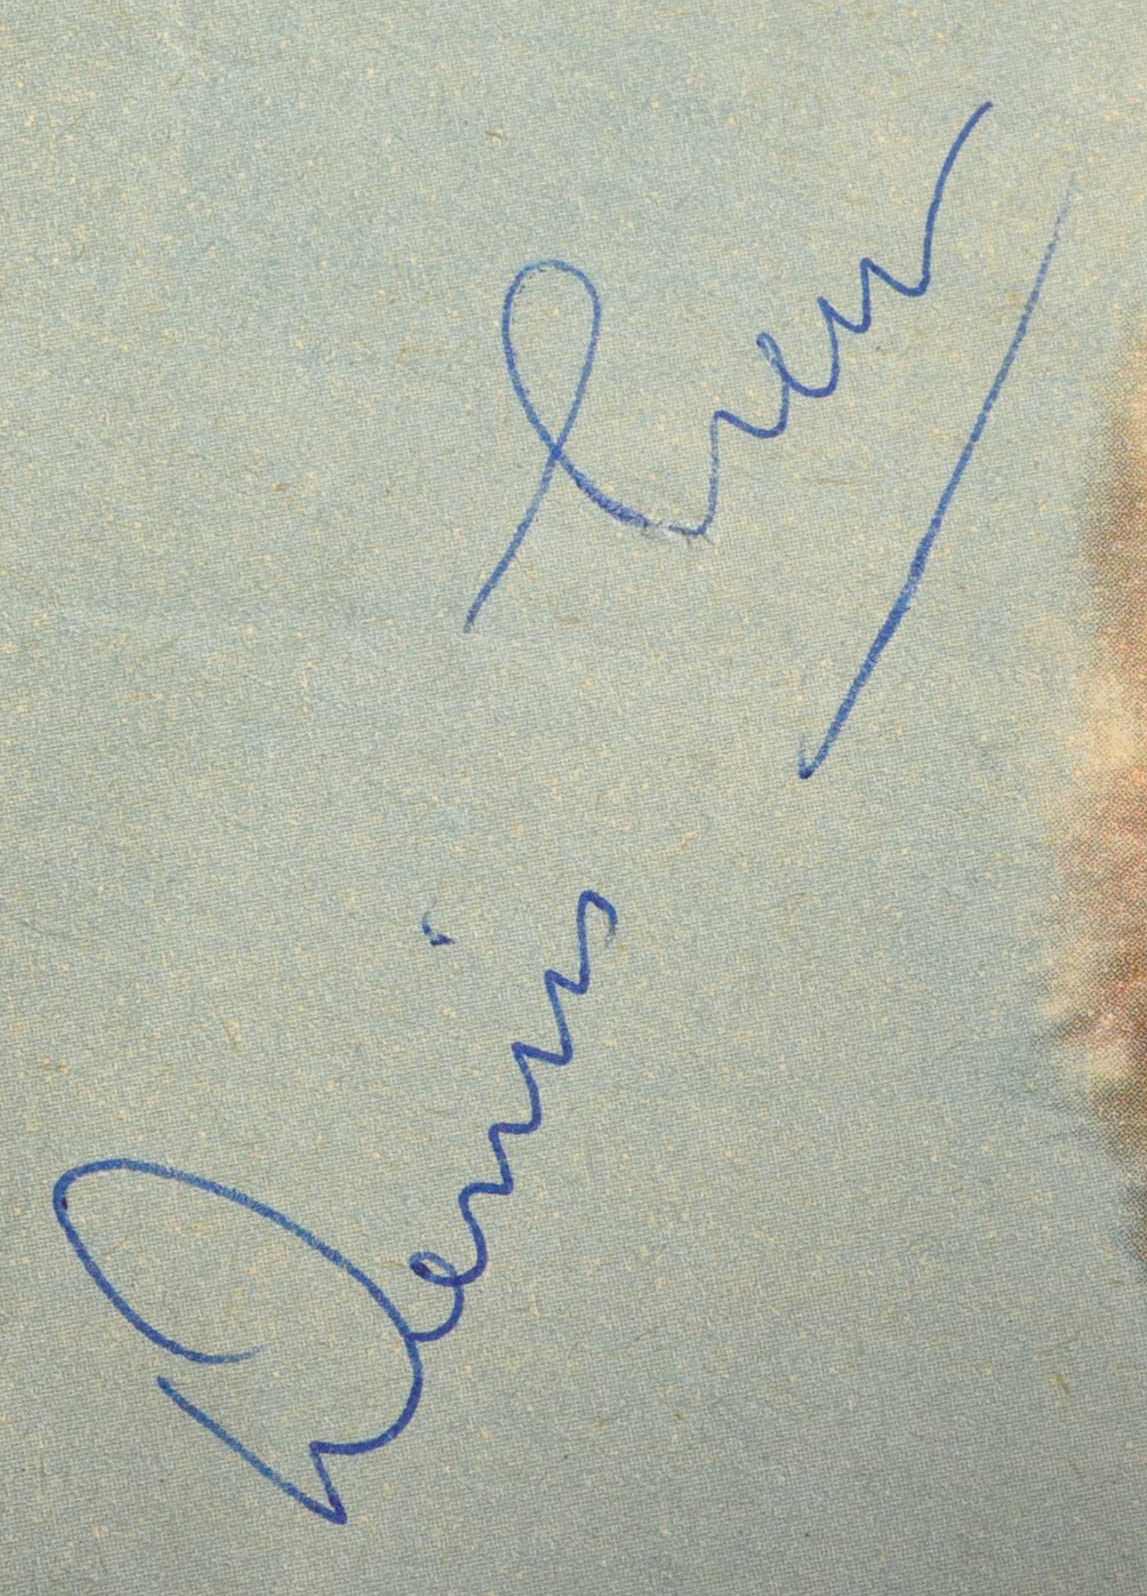 DENIS LAW(1940-PRESENT) - MANCHESTER UNITED - AUTOGRAPH - Image 3 of 3